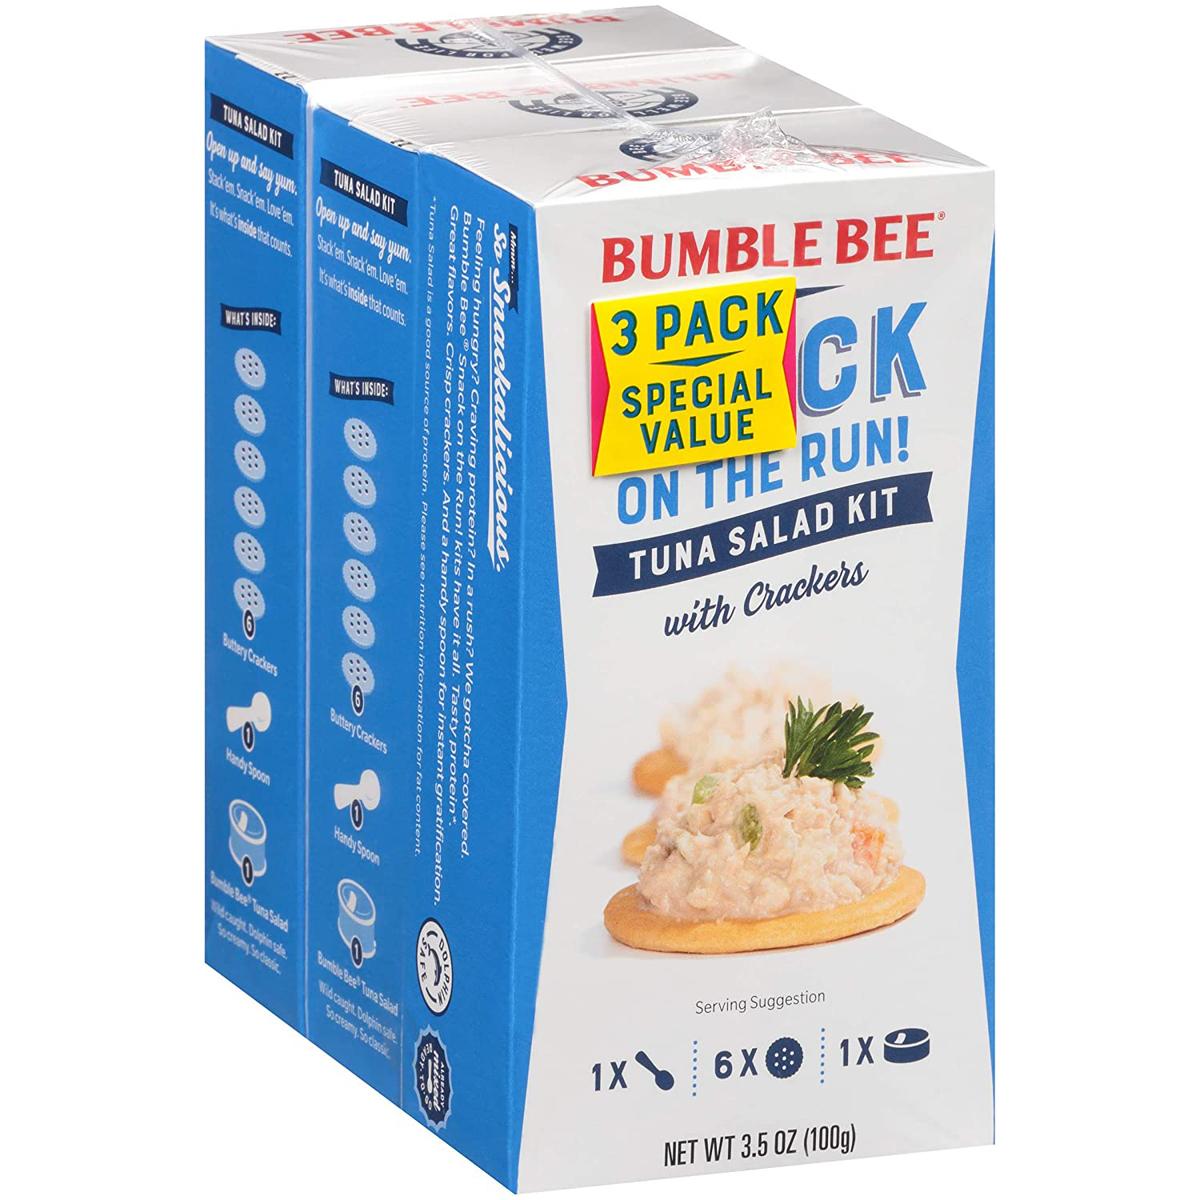 3 Bumble Bee Snack On The Run! Tuna Salad with Crackers for $2.22 Shipped